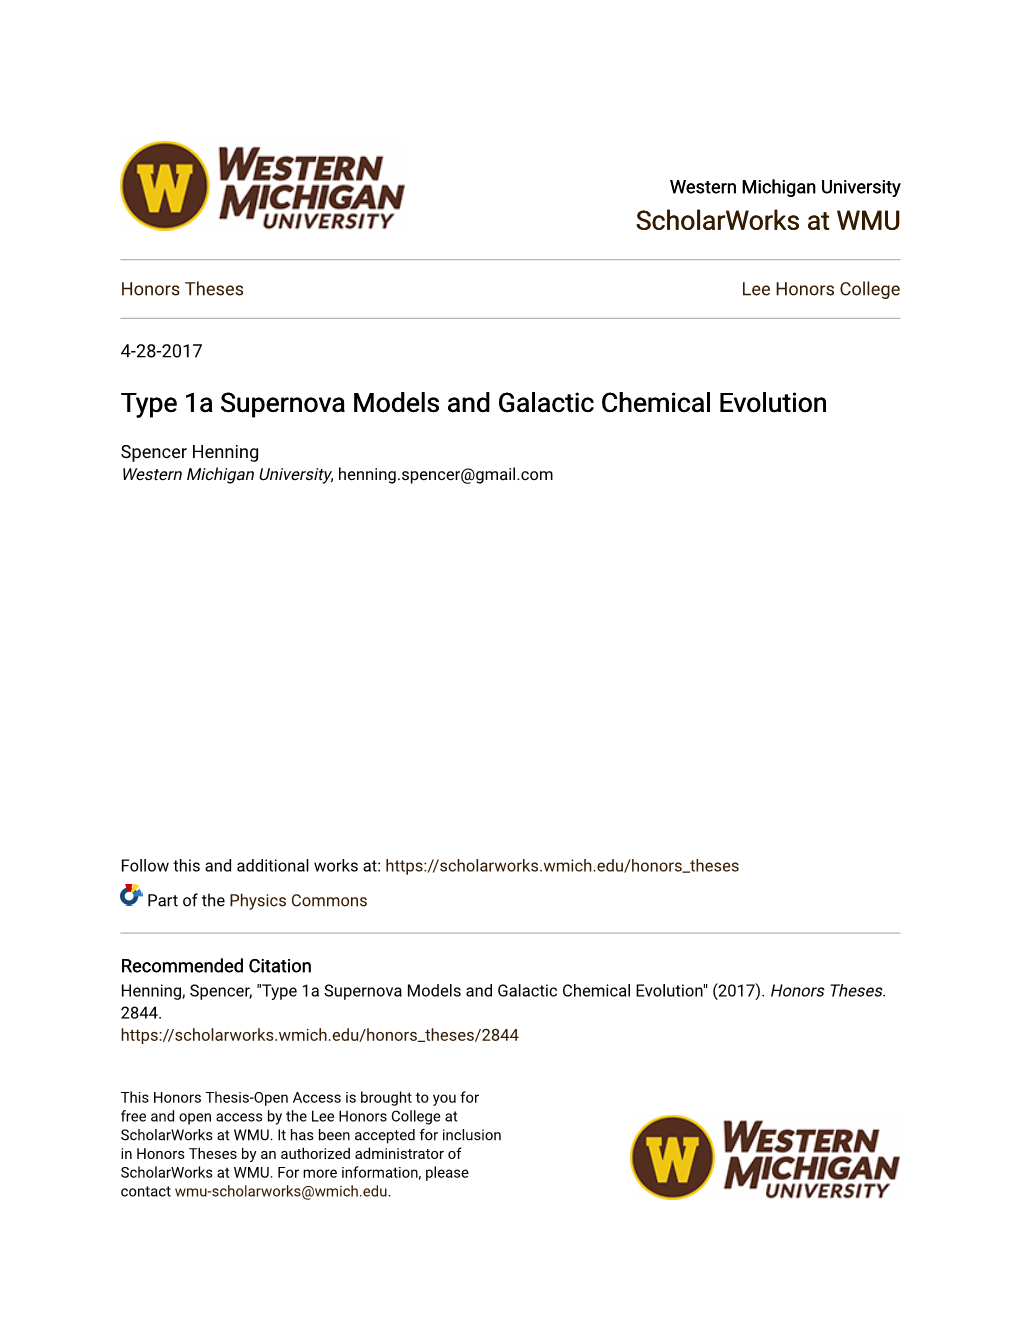 Type 1A Supernova Models and Galactic Chemical Evolution